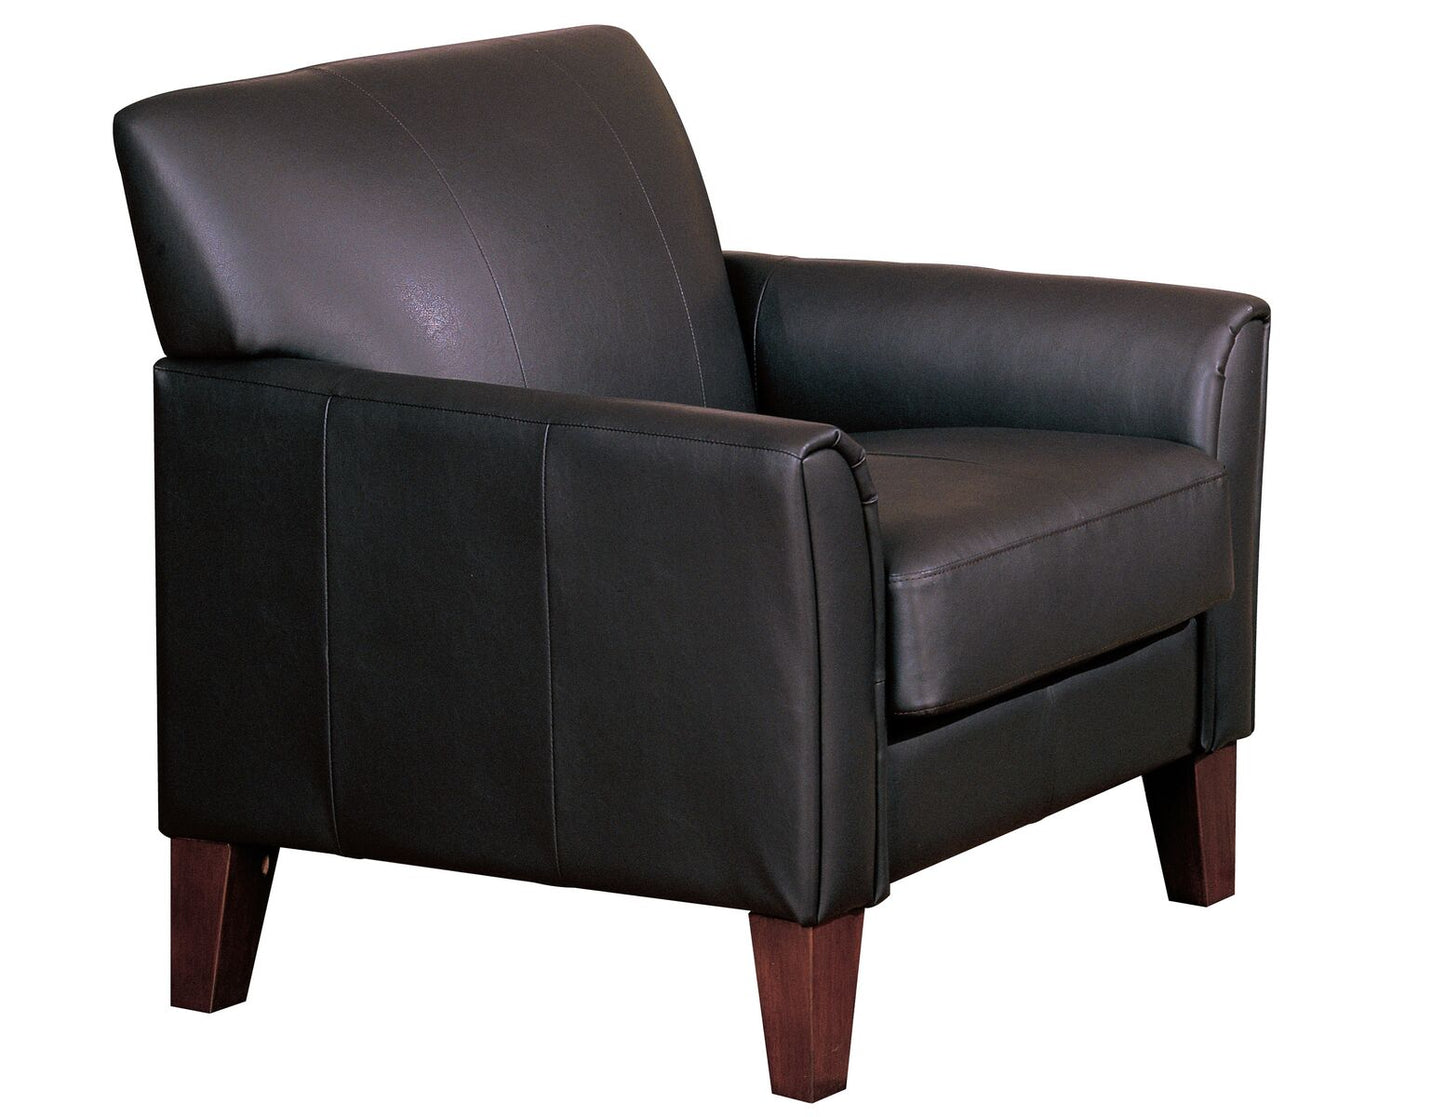 Modern Accent Chair with Ottoman - Dark Brown Faux Leather